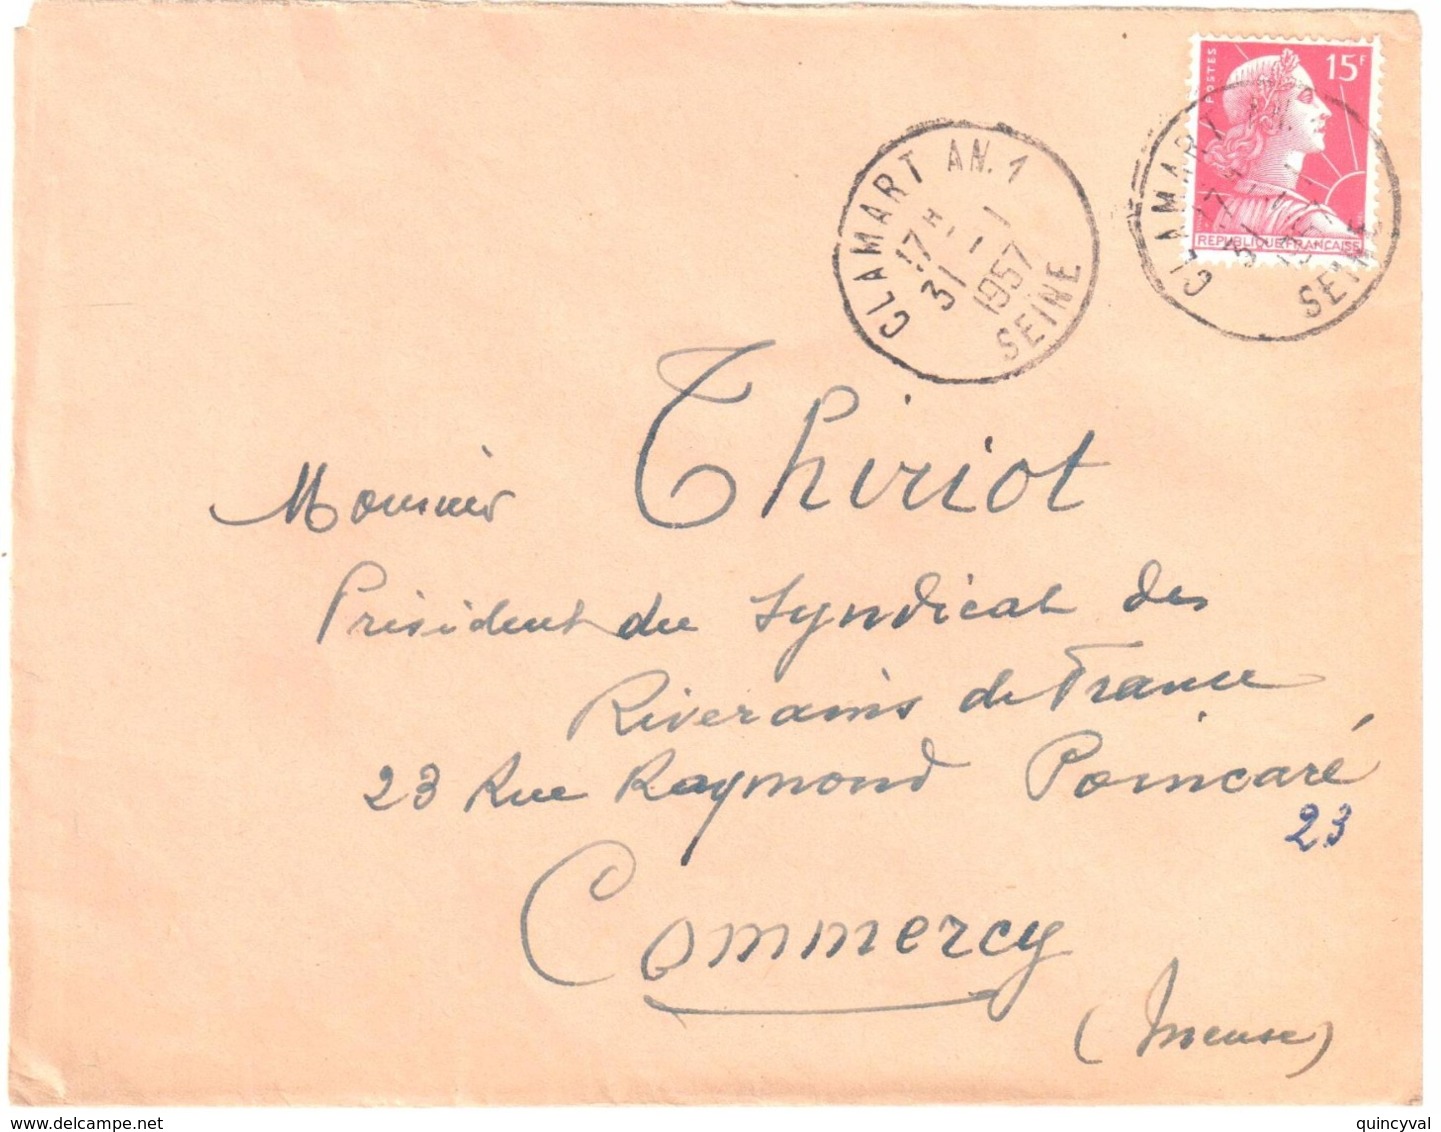 CLAMART AN.1 Seine Lettre 15F Muller Rouge Yv 1011 Ob 31 1 1957 Type A9 Dest Commercy Meuse - Covers & Documents